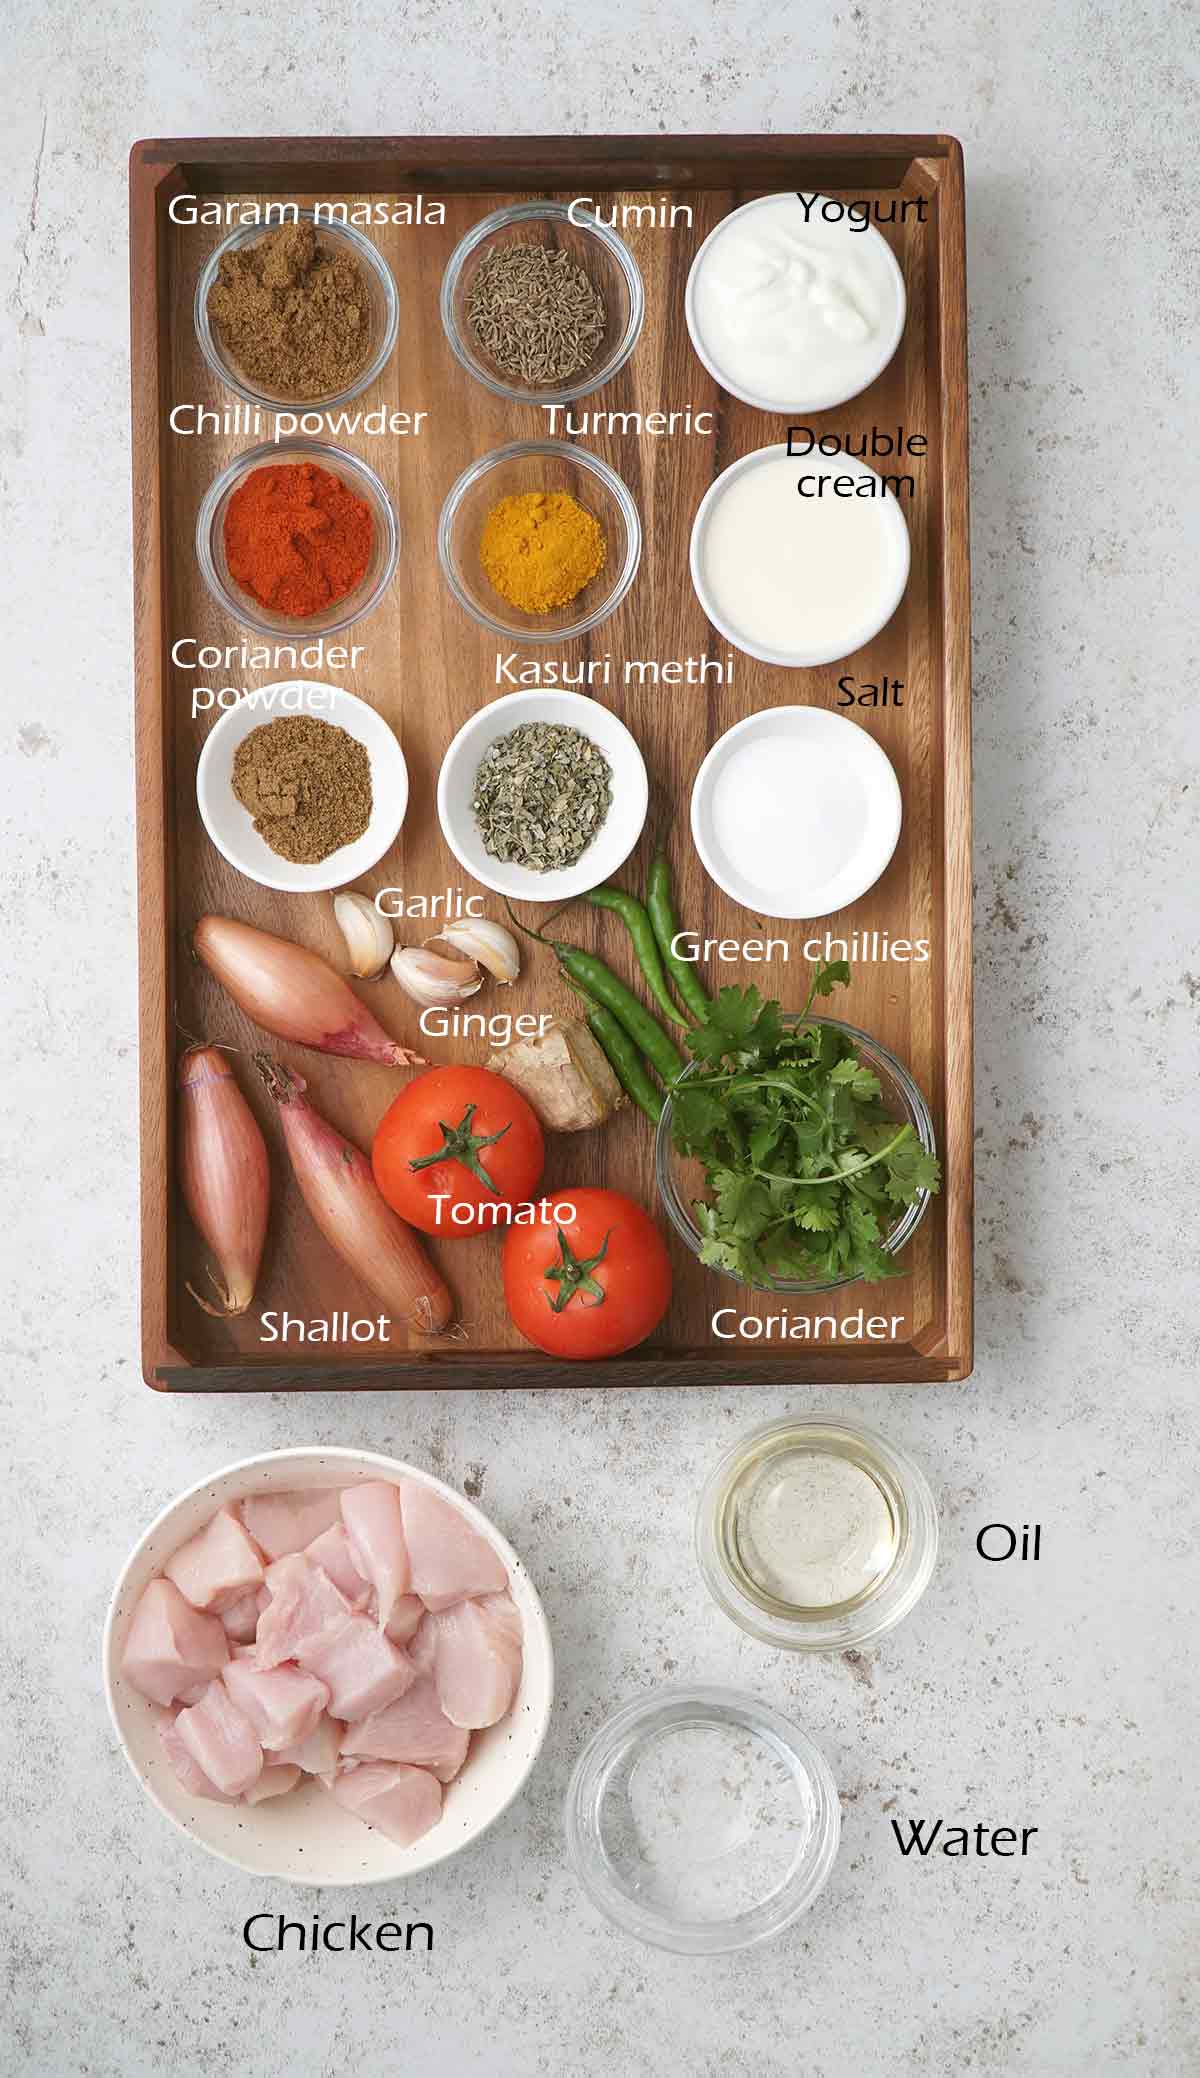 Labelled ingredients for making chicken curry displayed on the white table.